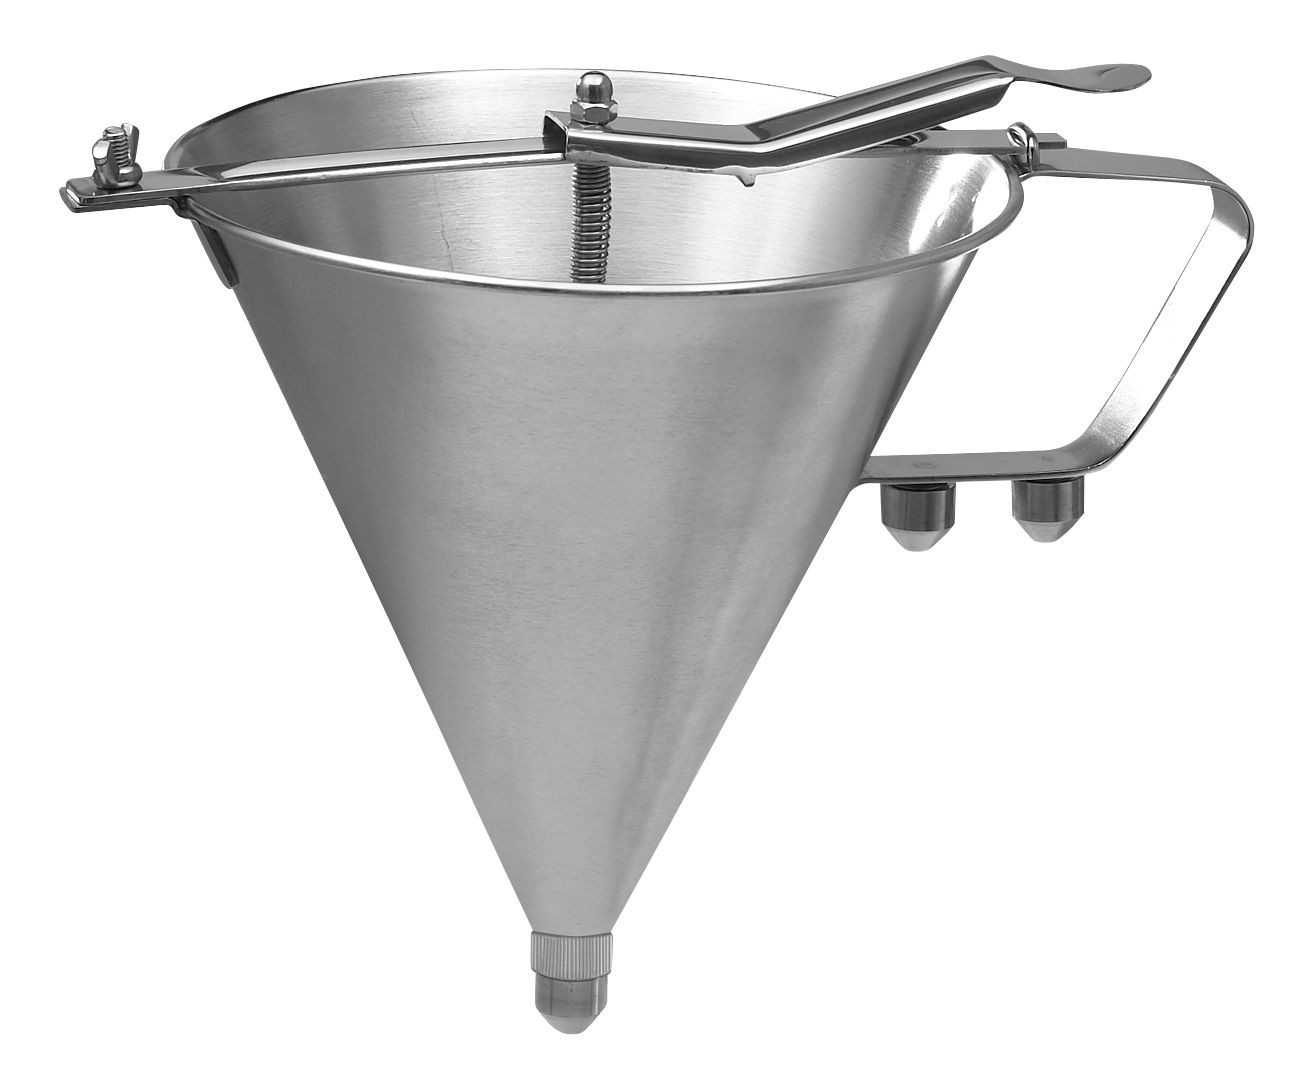 Winco SF-7 Stainless Steel Confectionery Funnel with 3-Nozzles